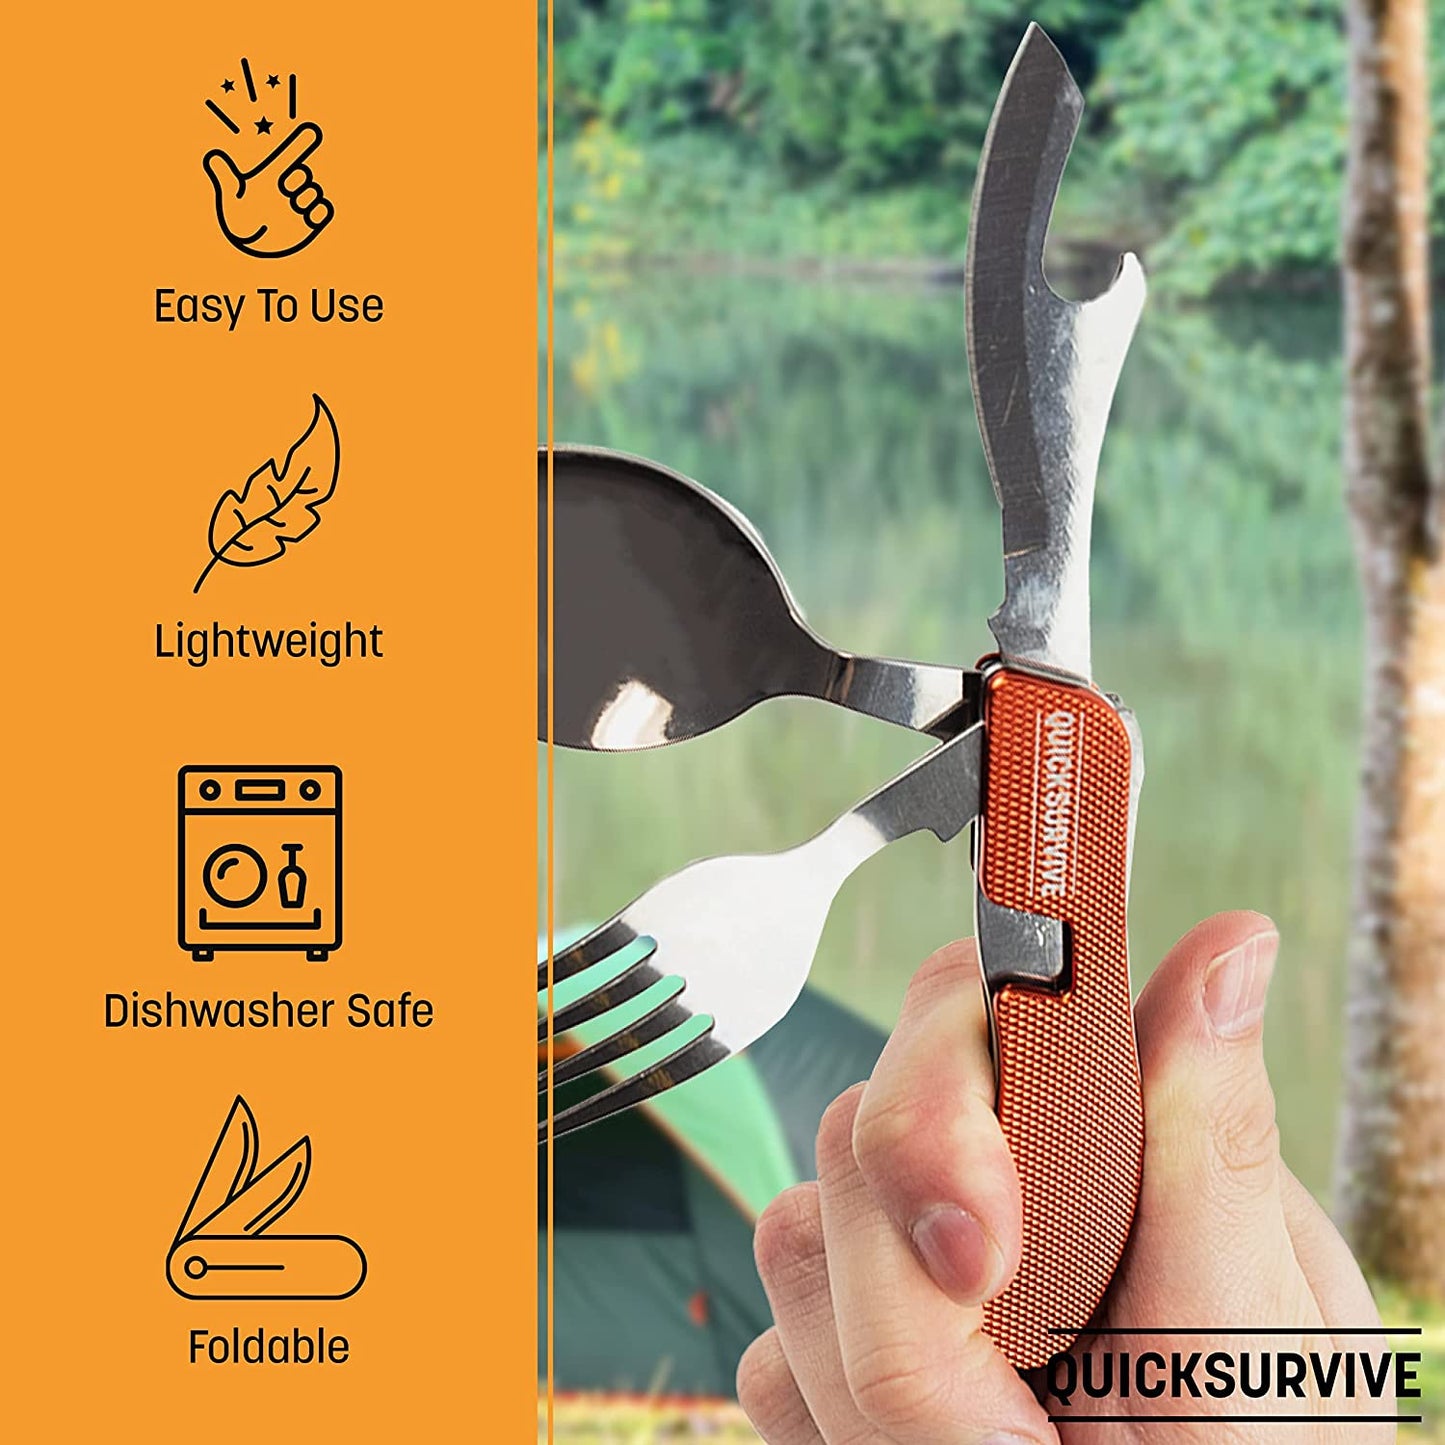 4-in-1 Pocket Camping Utensil Tool Stainless Steel Fork, Knife, Spoon, Bottle Opener by QUICKSURVIVE